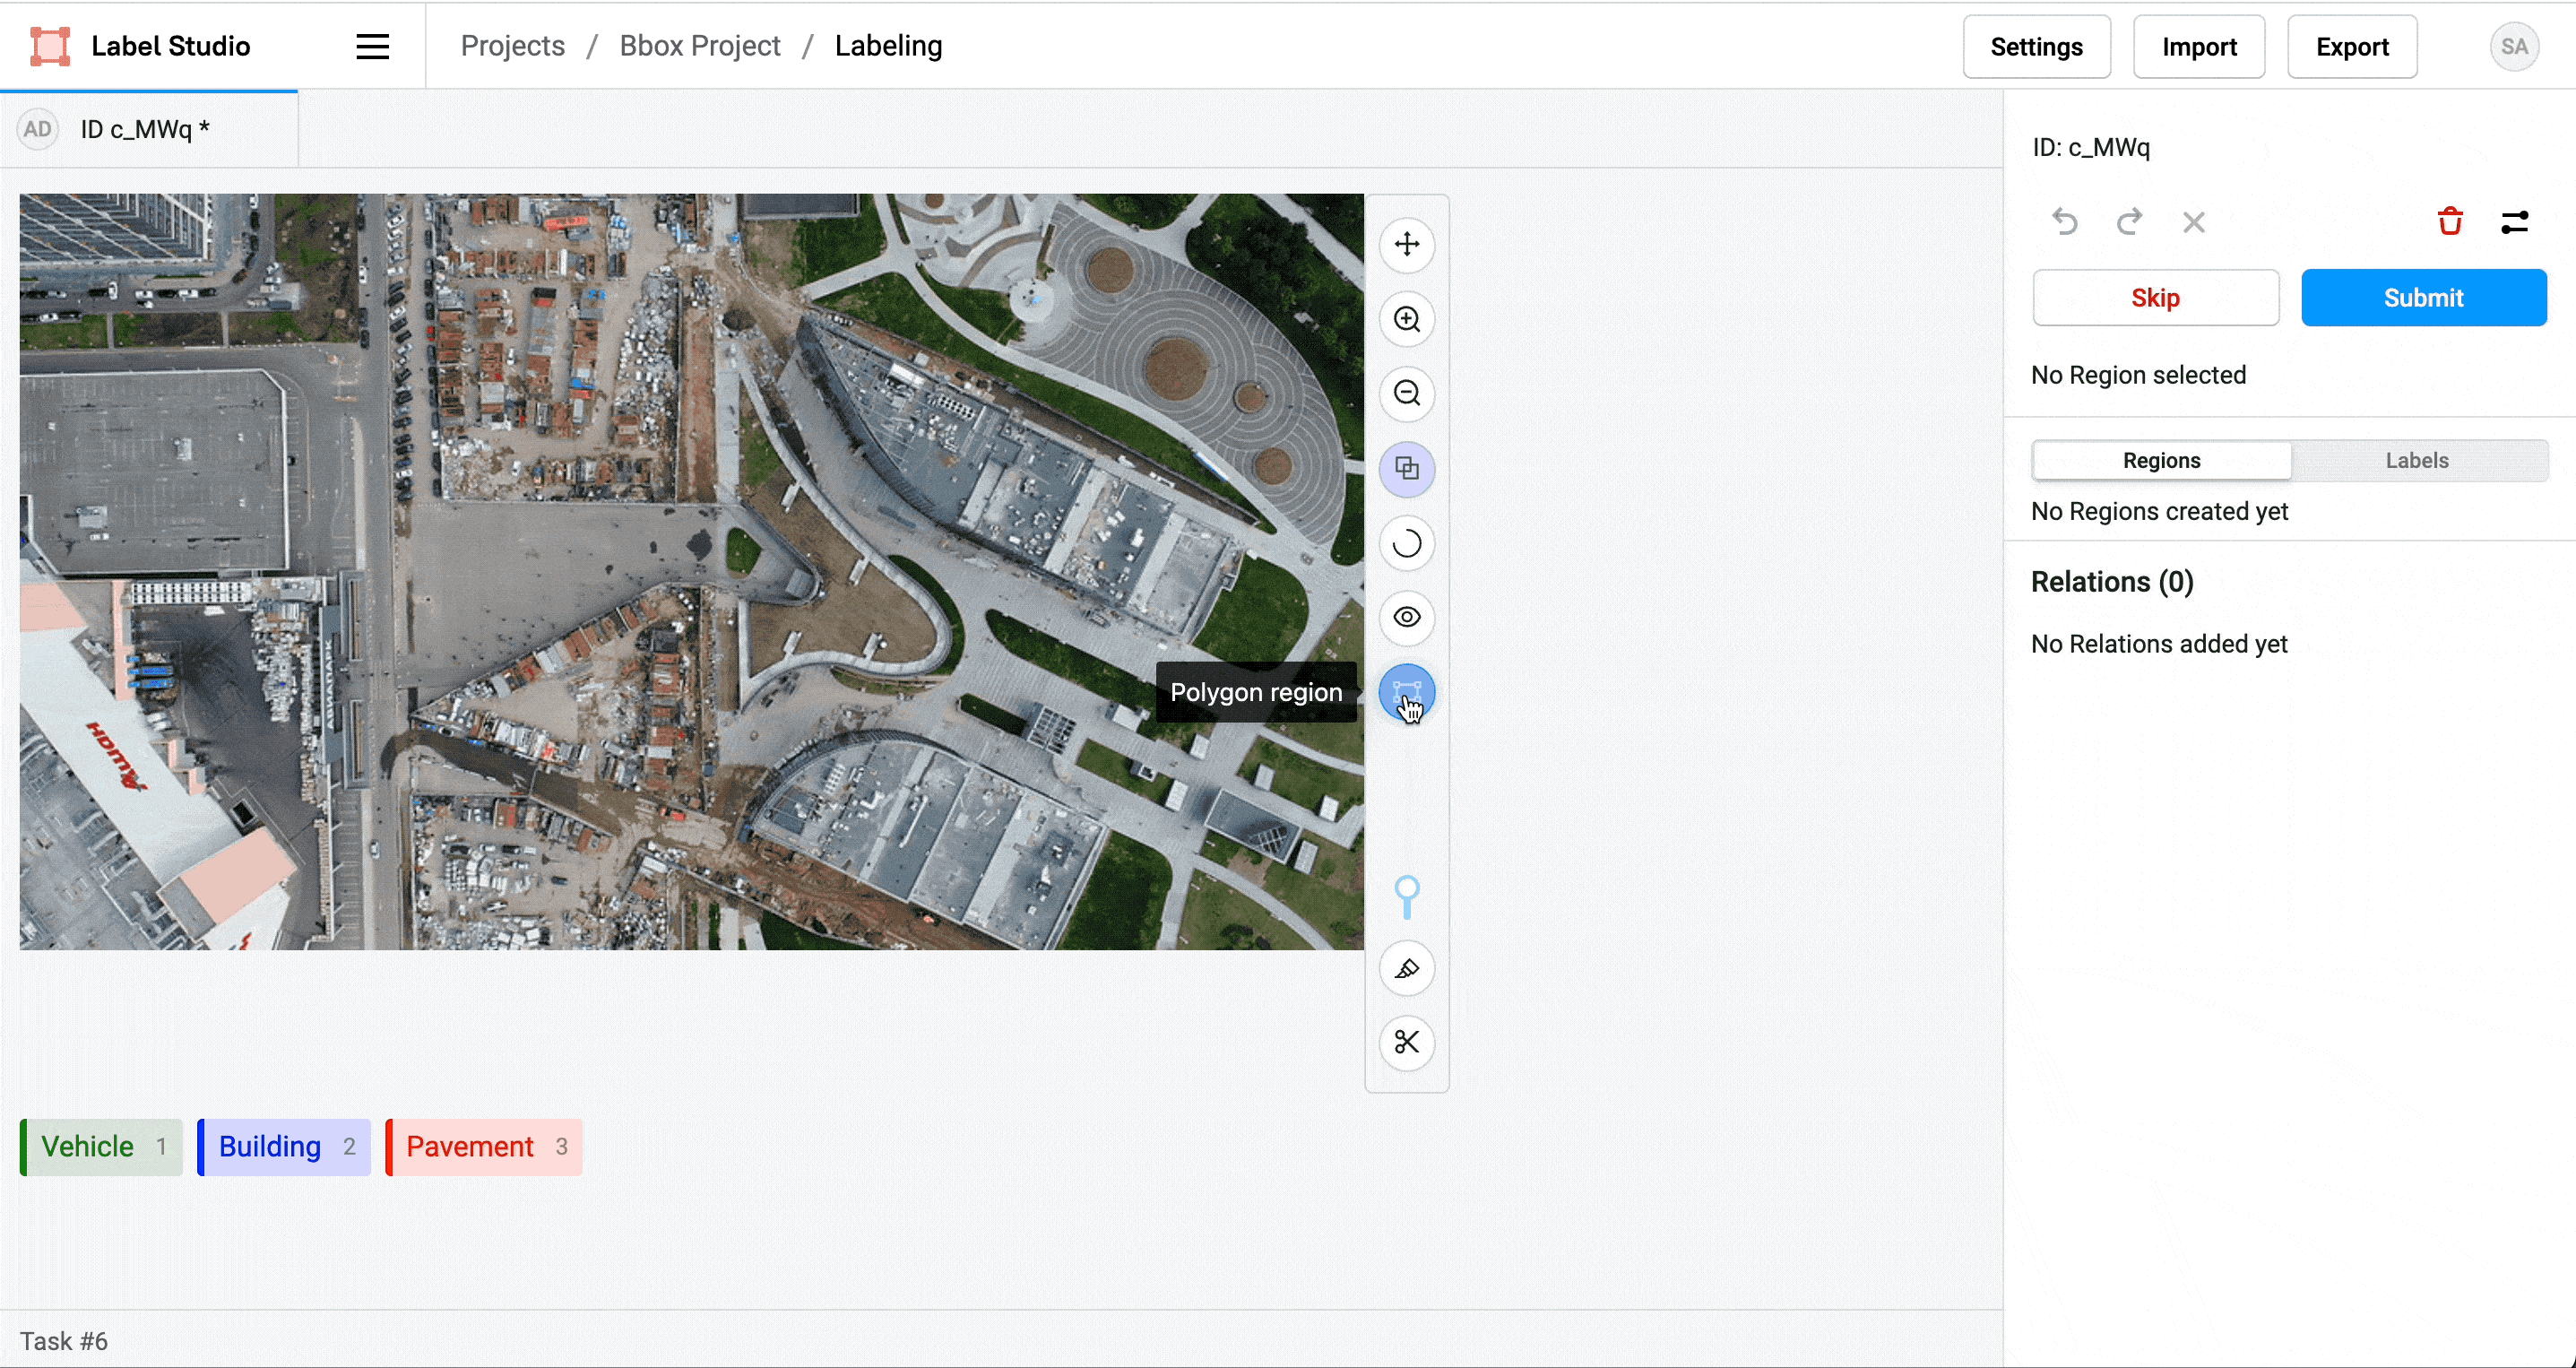 Gif of adding polygons and rectangle regions and then labeling them to an aerial image of a city in the Label Studio UI.